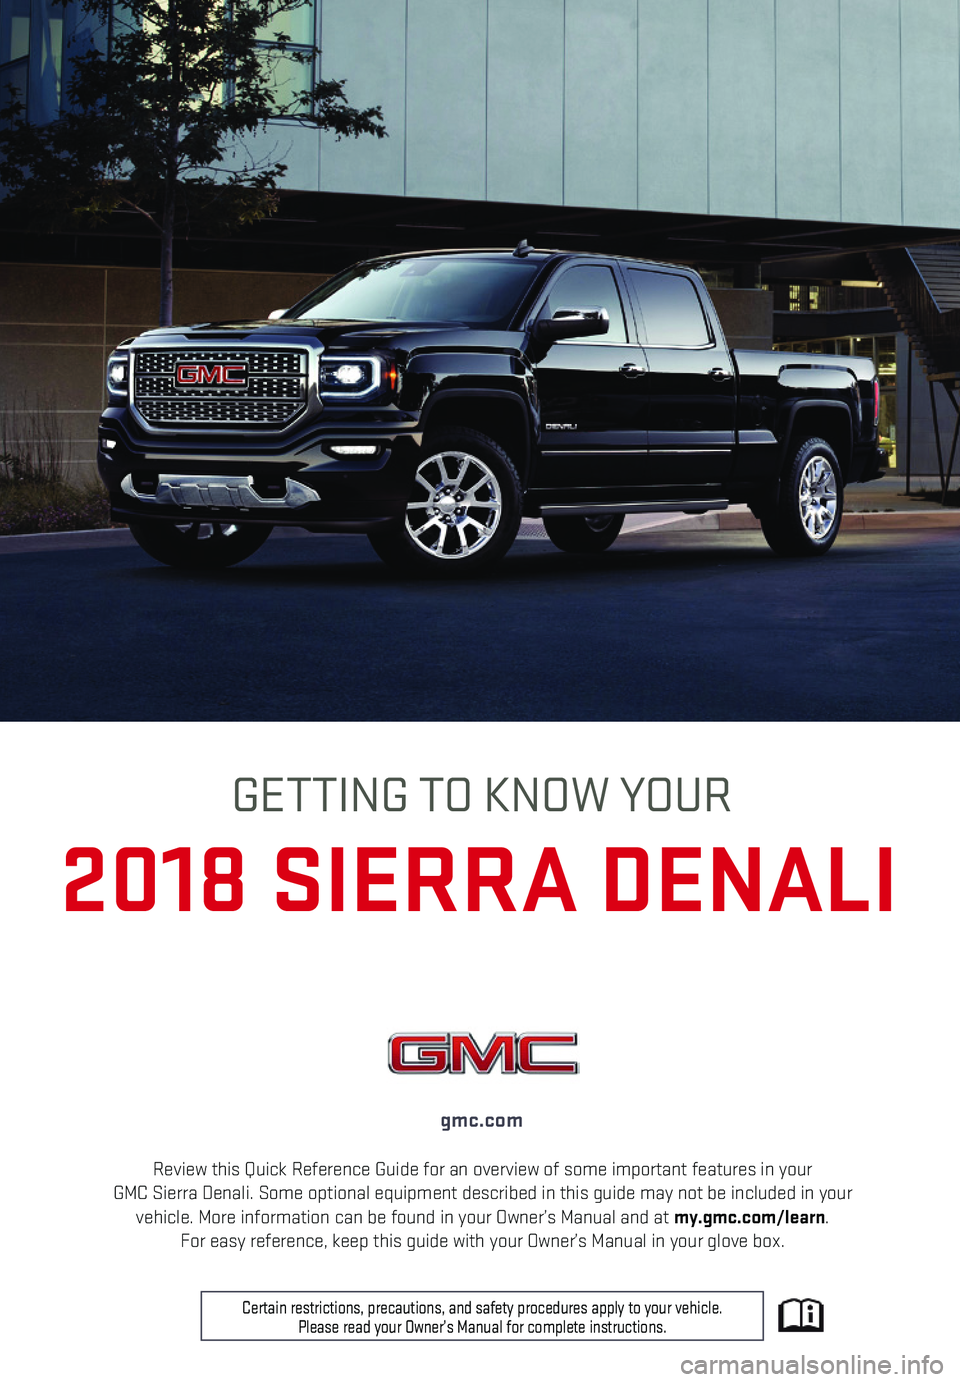 GMC SIERRA 2018  Get To Know Guide 